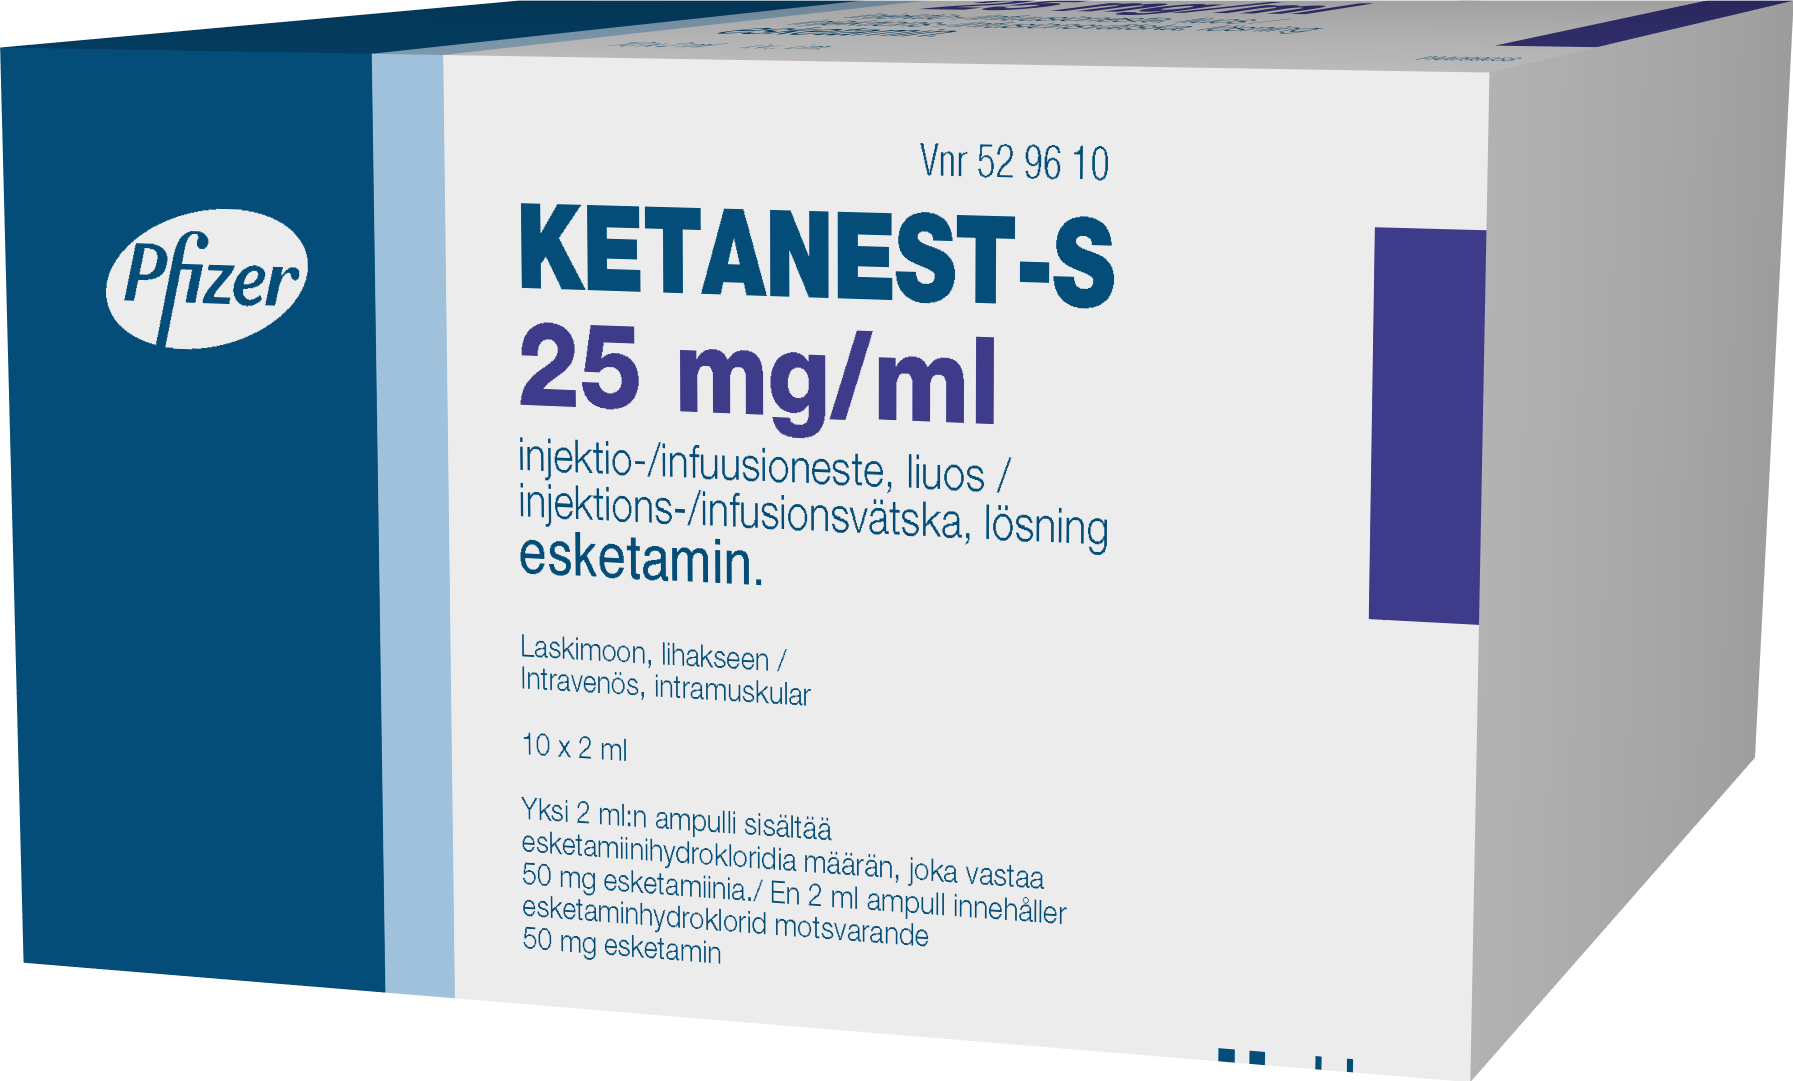 Harnessing the Power of Ketanest for Improved Patient Outcomes